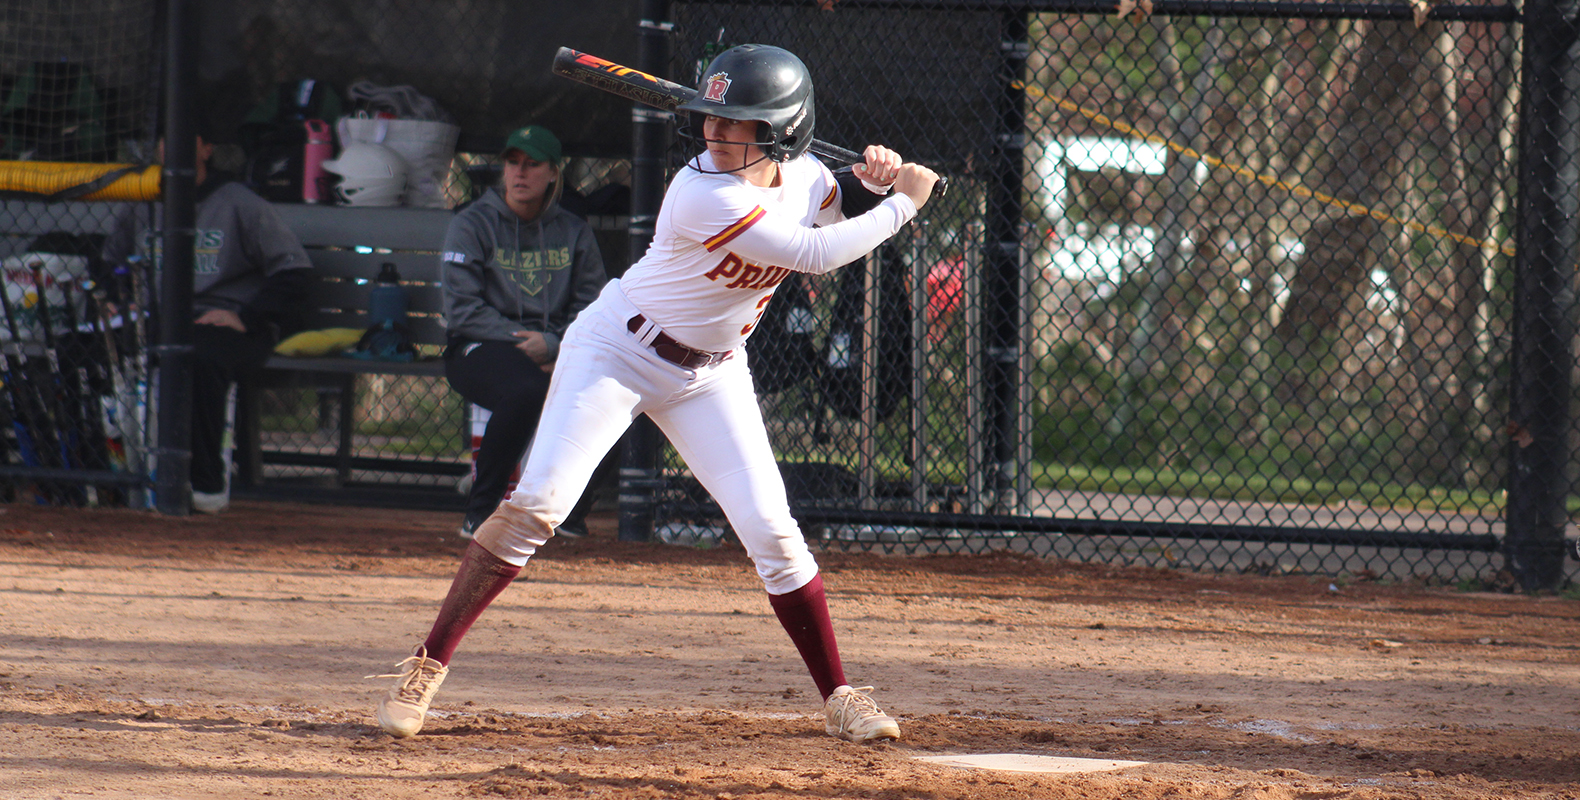 Regis Falls in Doubleheader to Lasell